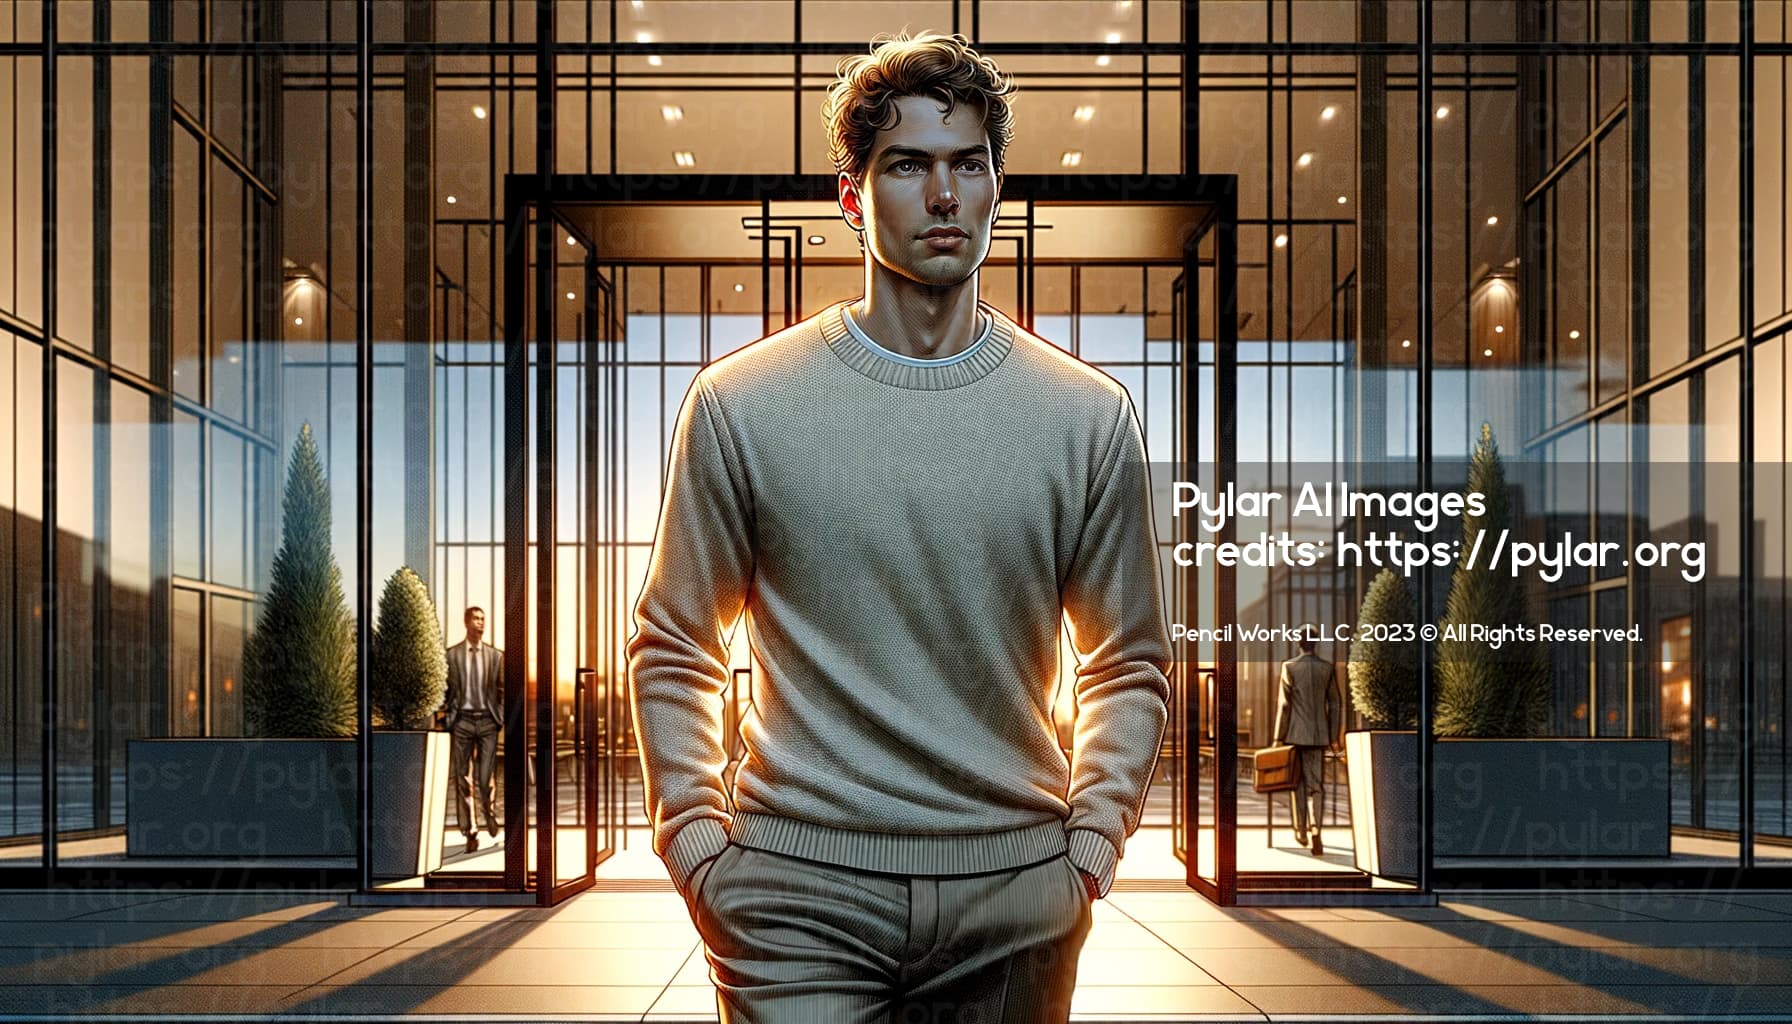 Craft a panoramic HD image of a realistic drawing of an anonymous man with a neutral expression, short curly hair, dressed in a cream-colored crewneck sweater. The scene is set at dusk, with the man leaving a contemporary office building. He should be captured in motion, walking out of the building's front doors. The office is modern with glass doors, reflecting the orange hues of the sunset. The man's figure should be in the foreground, heading towards the viewer, embodying the end of a workday and the transition from professional to personal time.